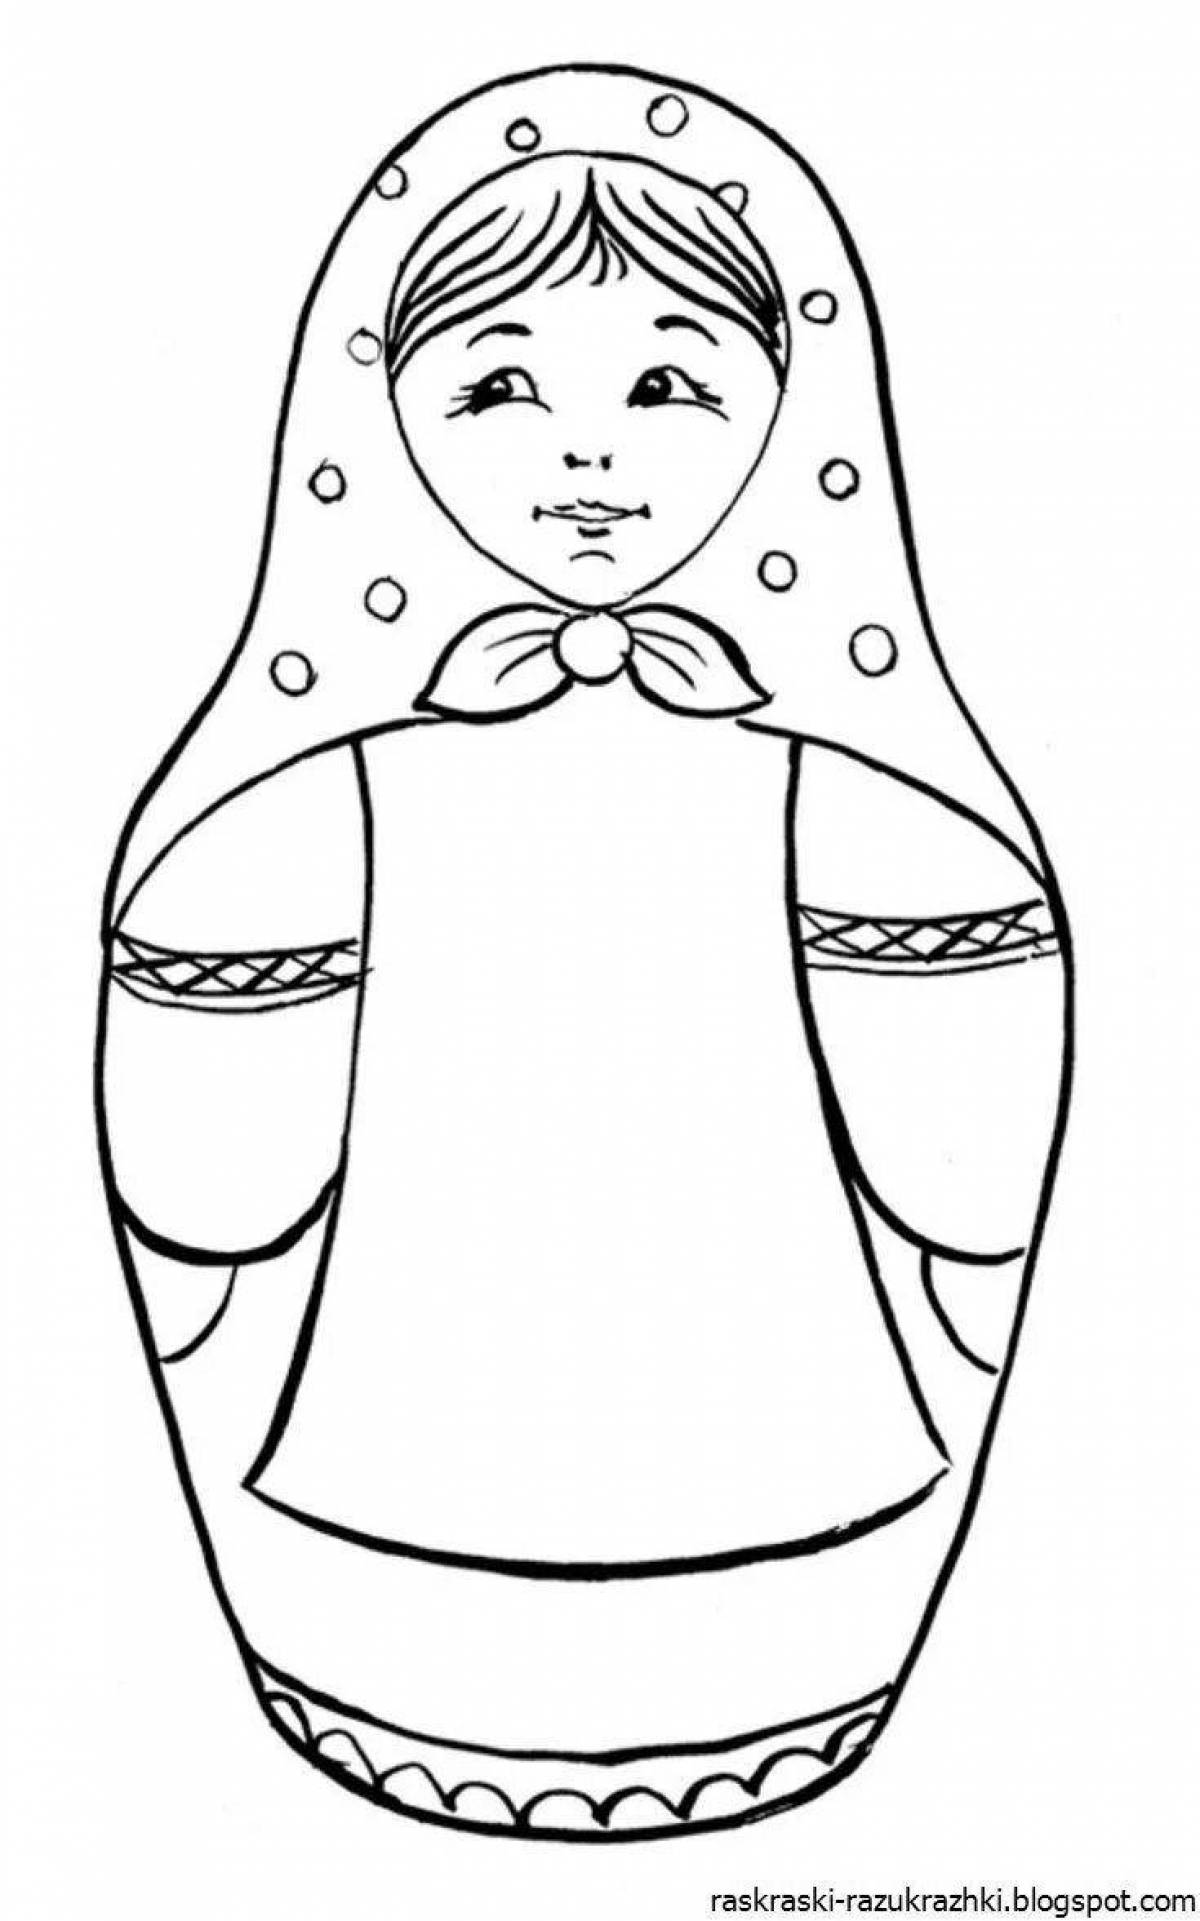 Adorable matryoshka coloring books for 3-4 year olds